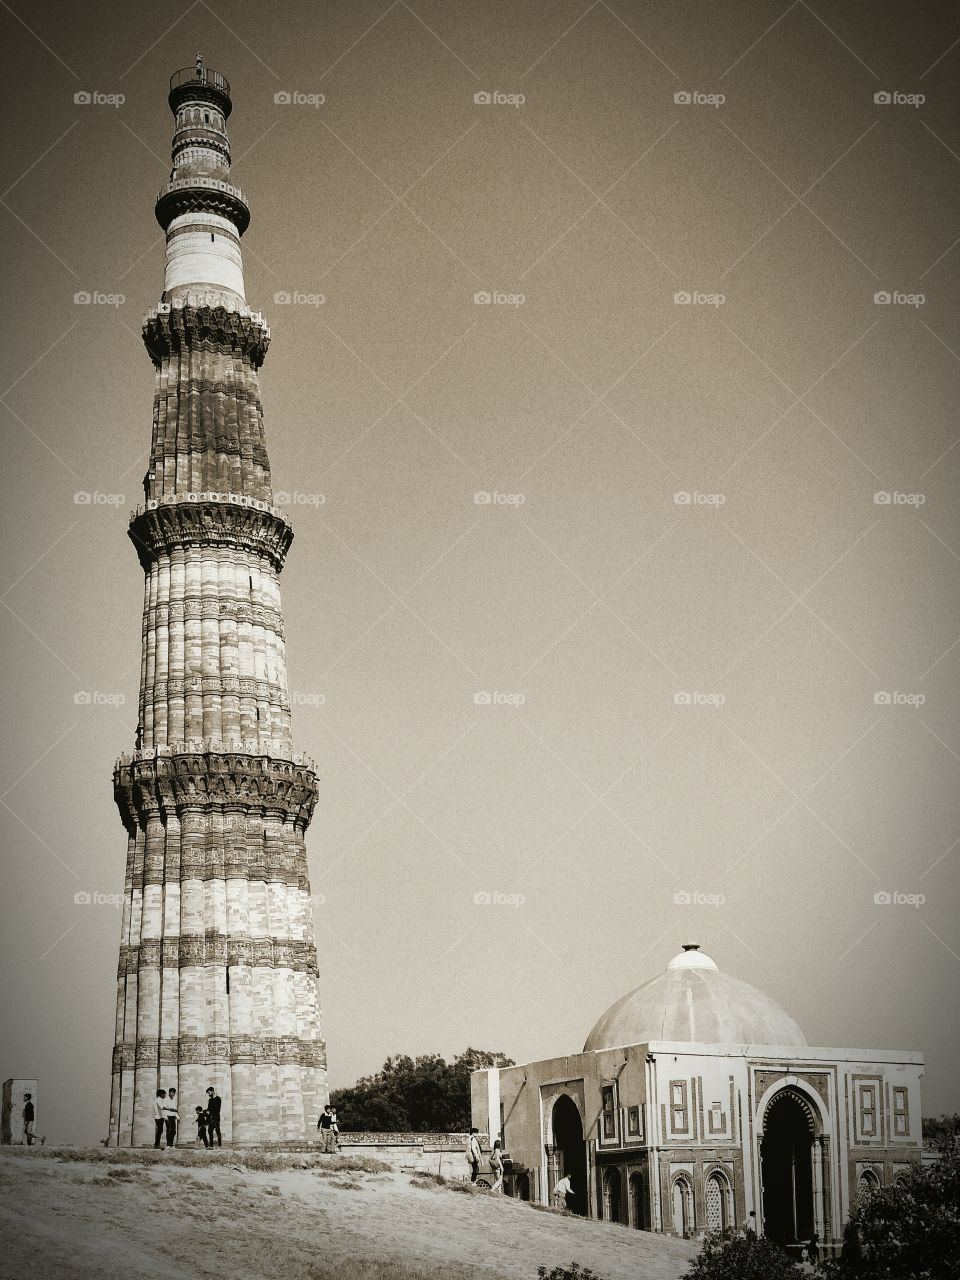 Mughal Heritage in the heart of New Delhi - UNESCO WORLD HERITAGE SITE - Qutub Minar - This was clicked using my smartphone which doesn't even begin to do justice to the impeccable intricate carvings on the structure!!!